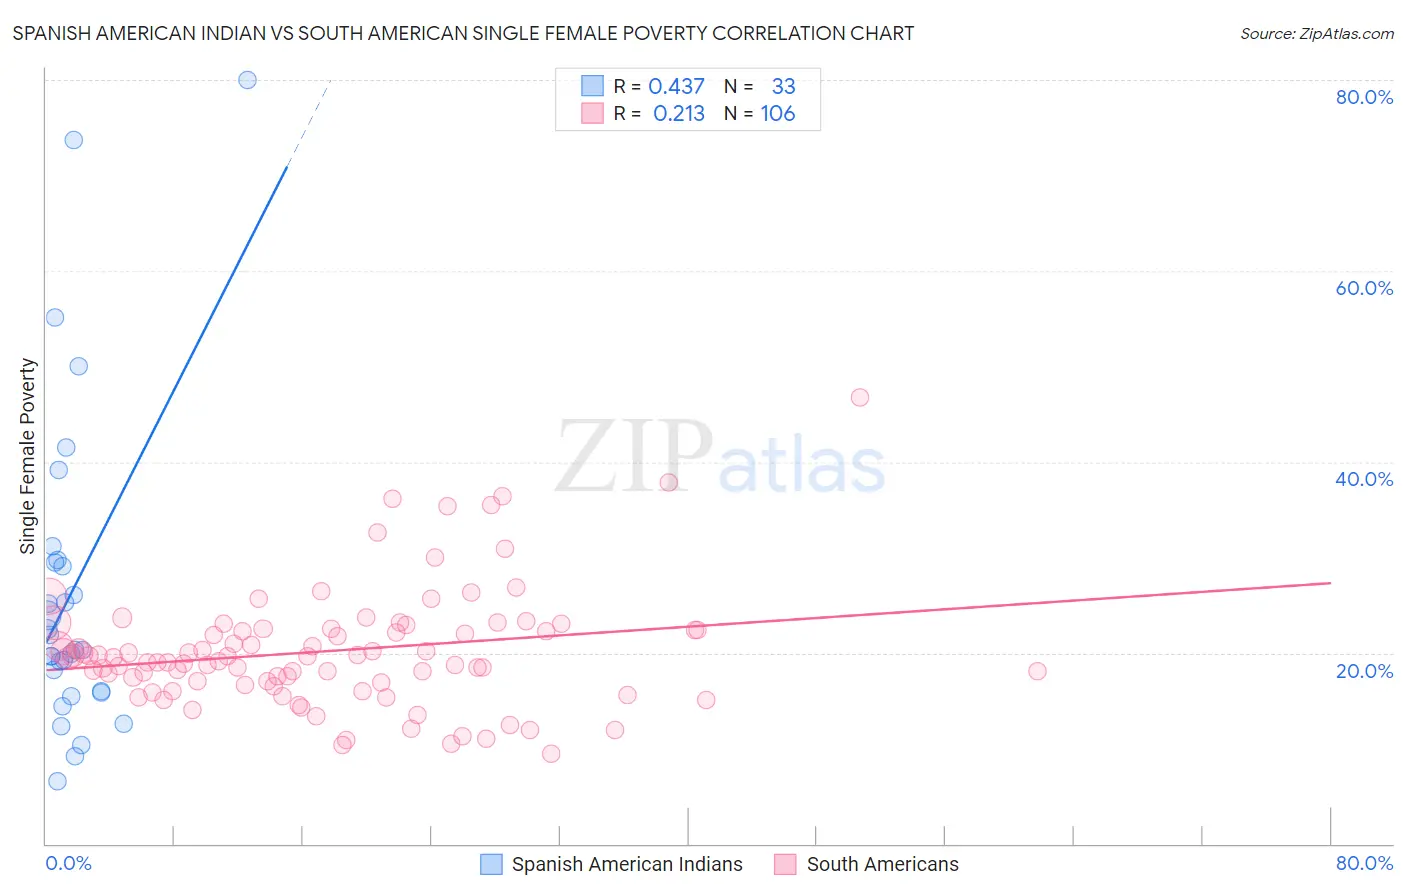 Spanish American Indian vs South American Single Female Poverty